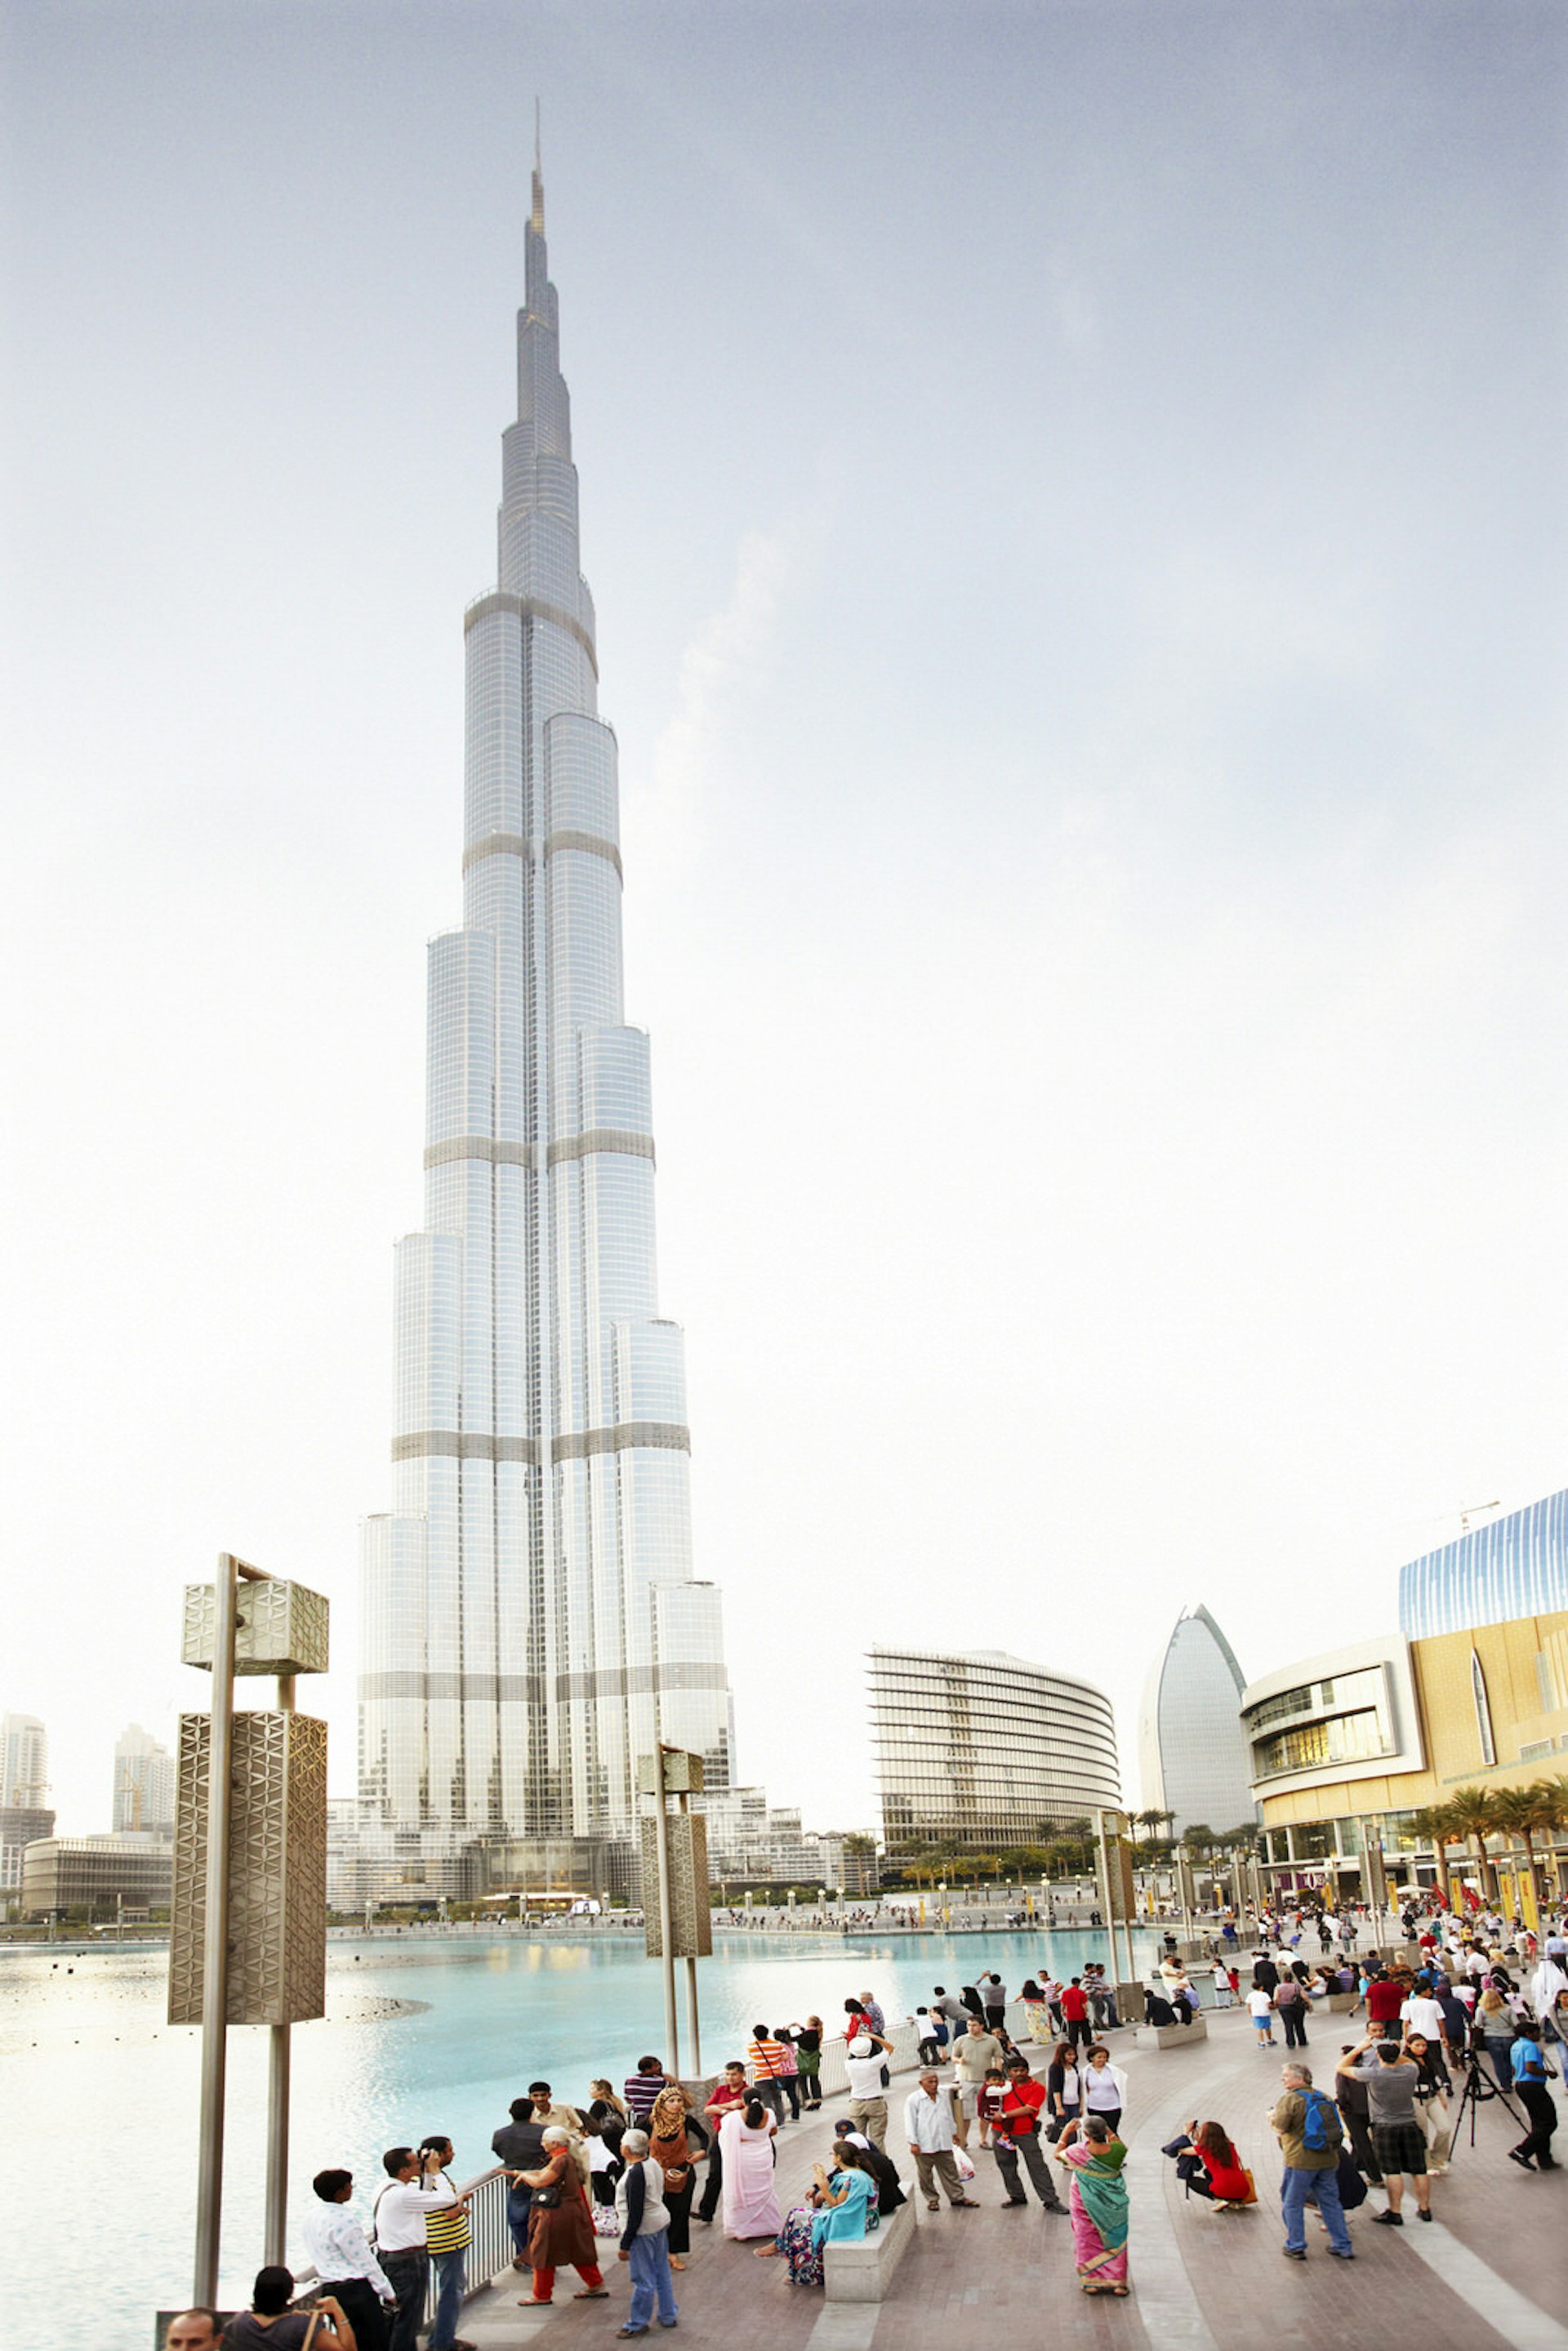 The Burj Khalifa towers over Downtown Dubai. Image by Andrew Mongomery / Lonely Planet 